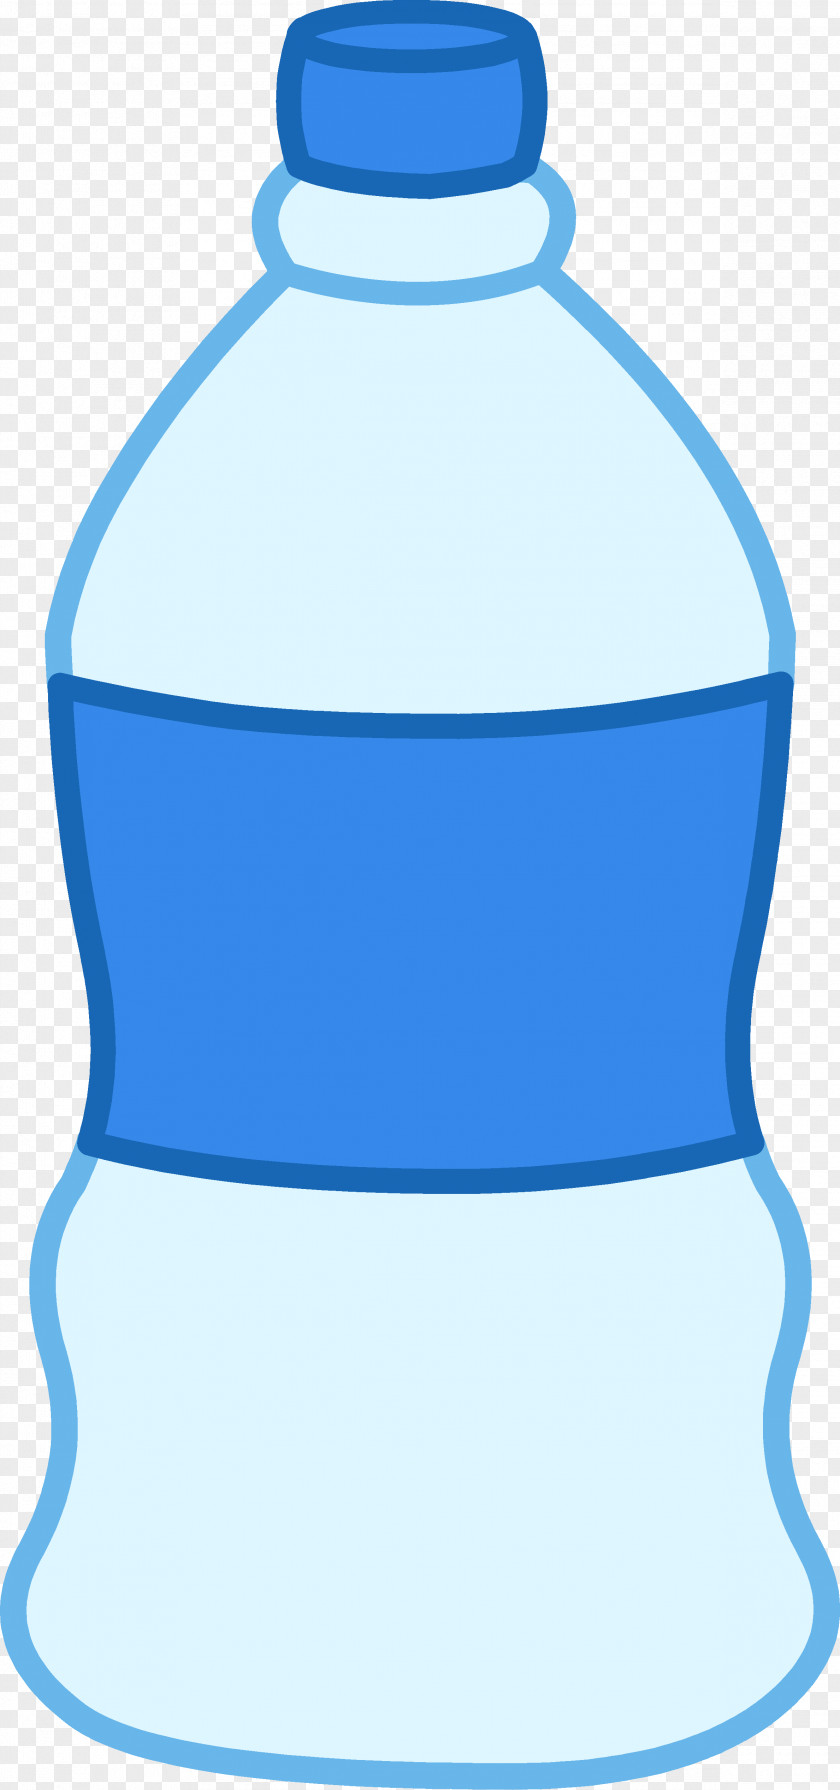 Gallon Container Cliparts Water Bottle Dasani Bottled Clip Art PNG